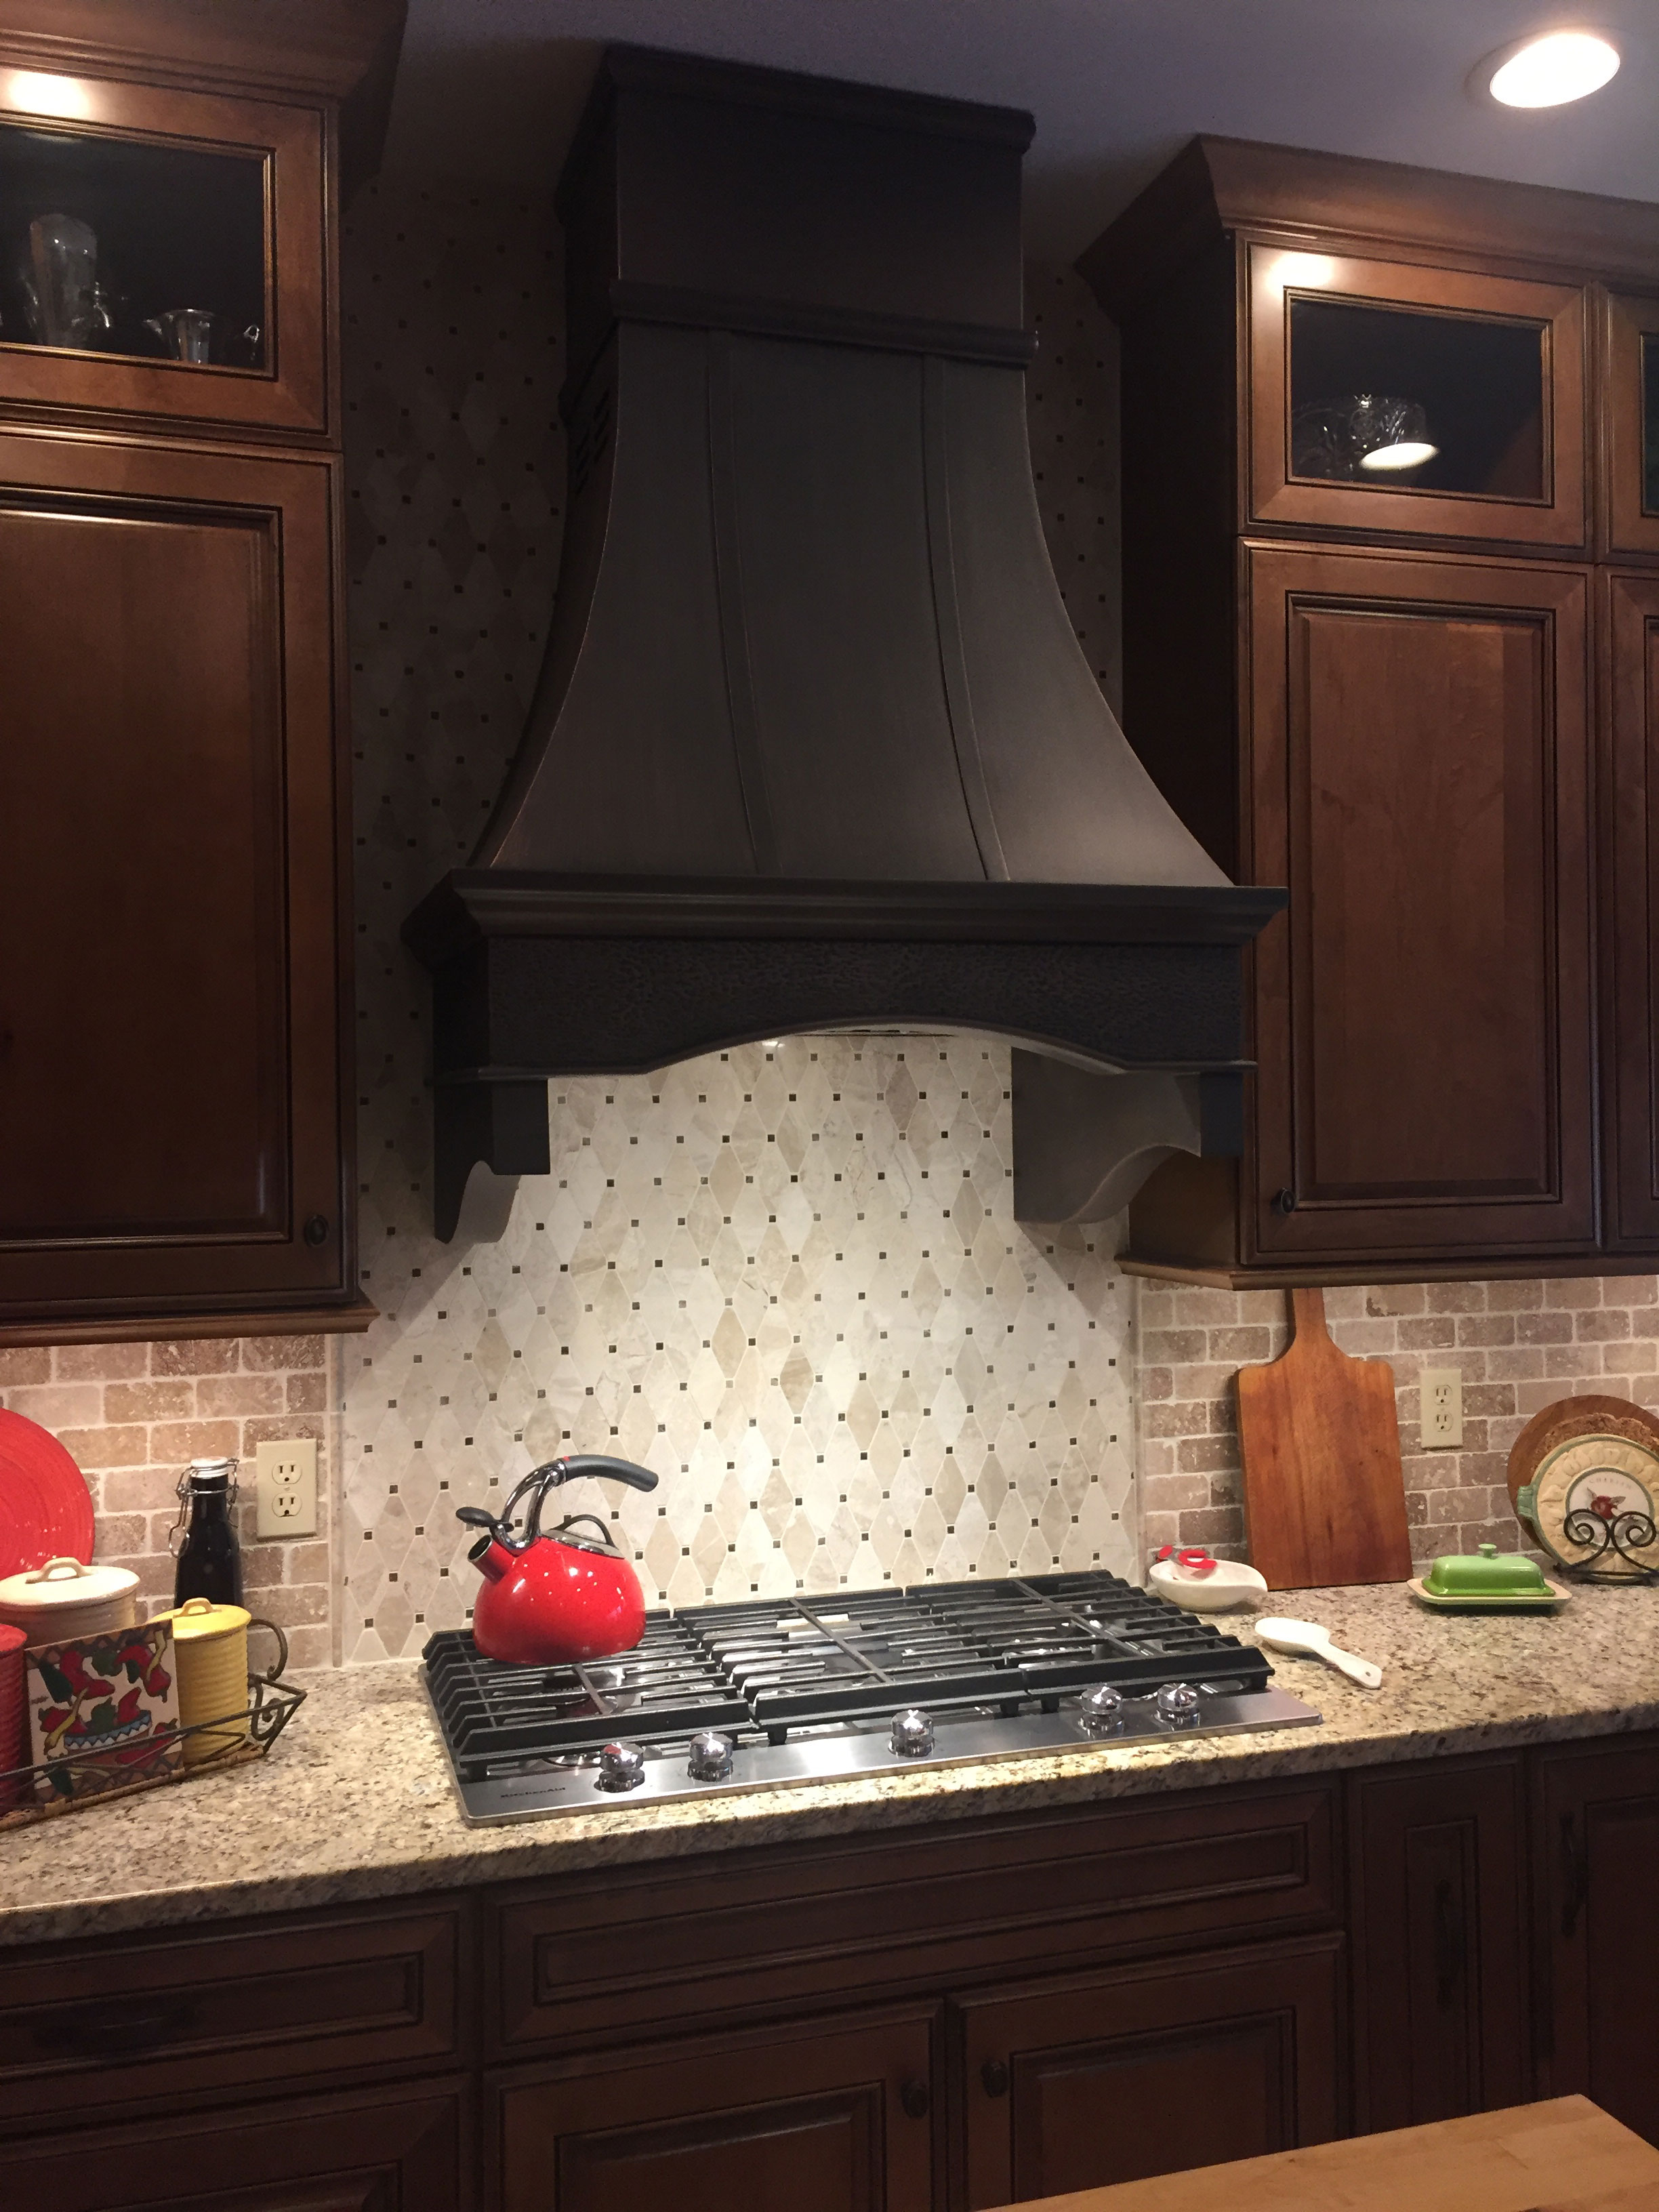 Beautiful kitchen design, consider incorporating range hood, browse through a tuscan kitchen gallery, opt for elegant brown kitchen cabinets